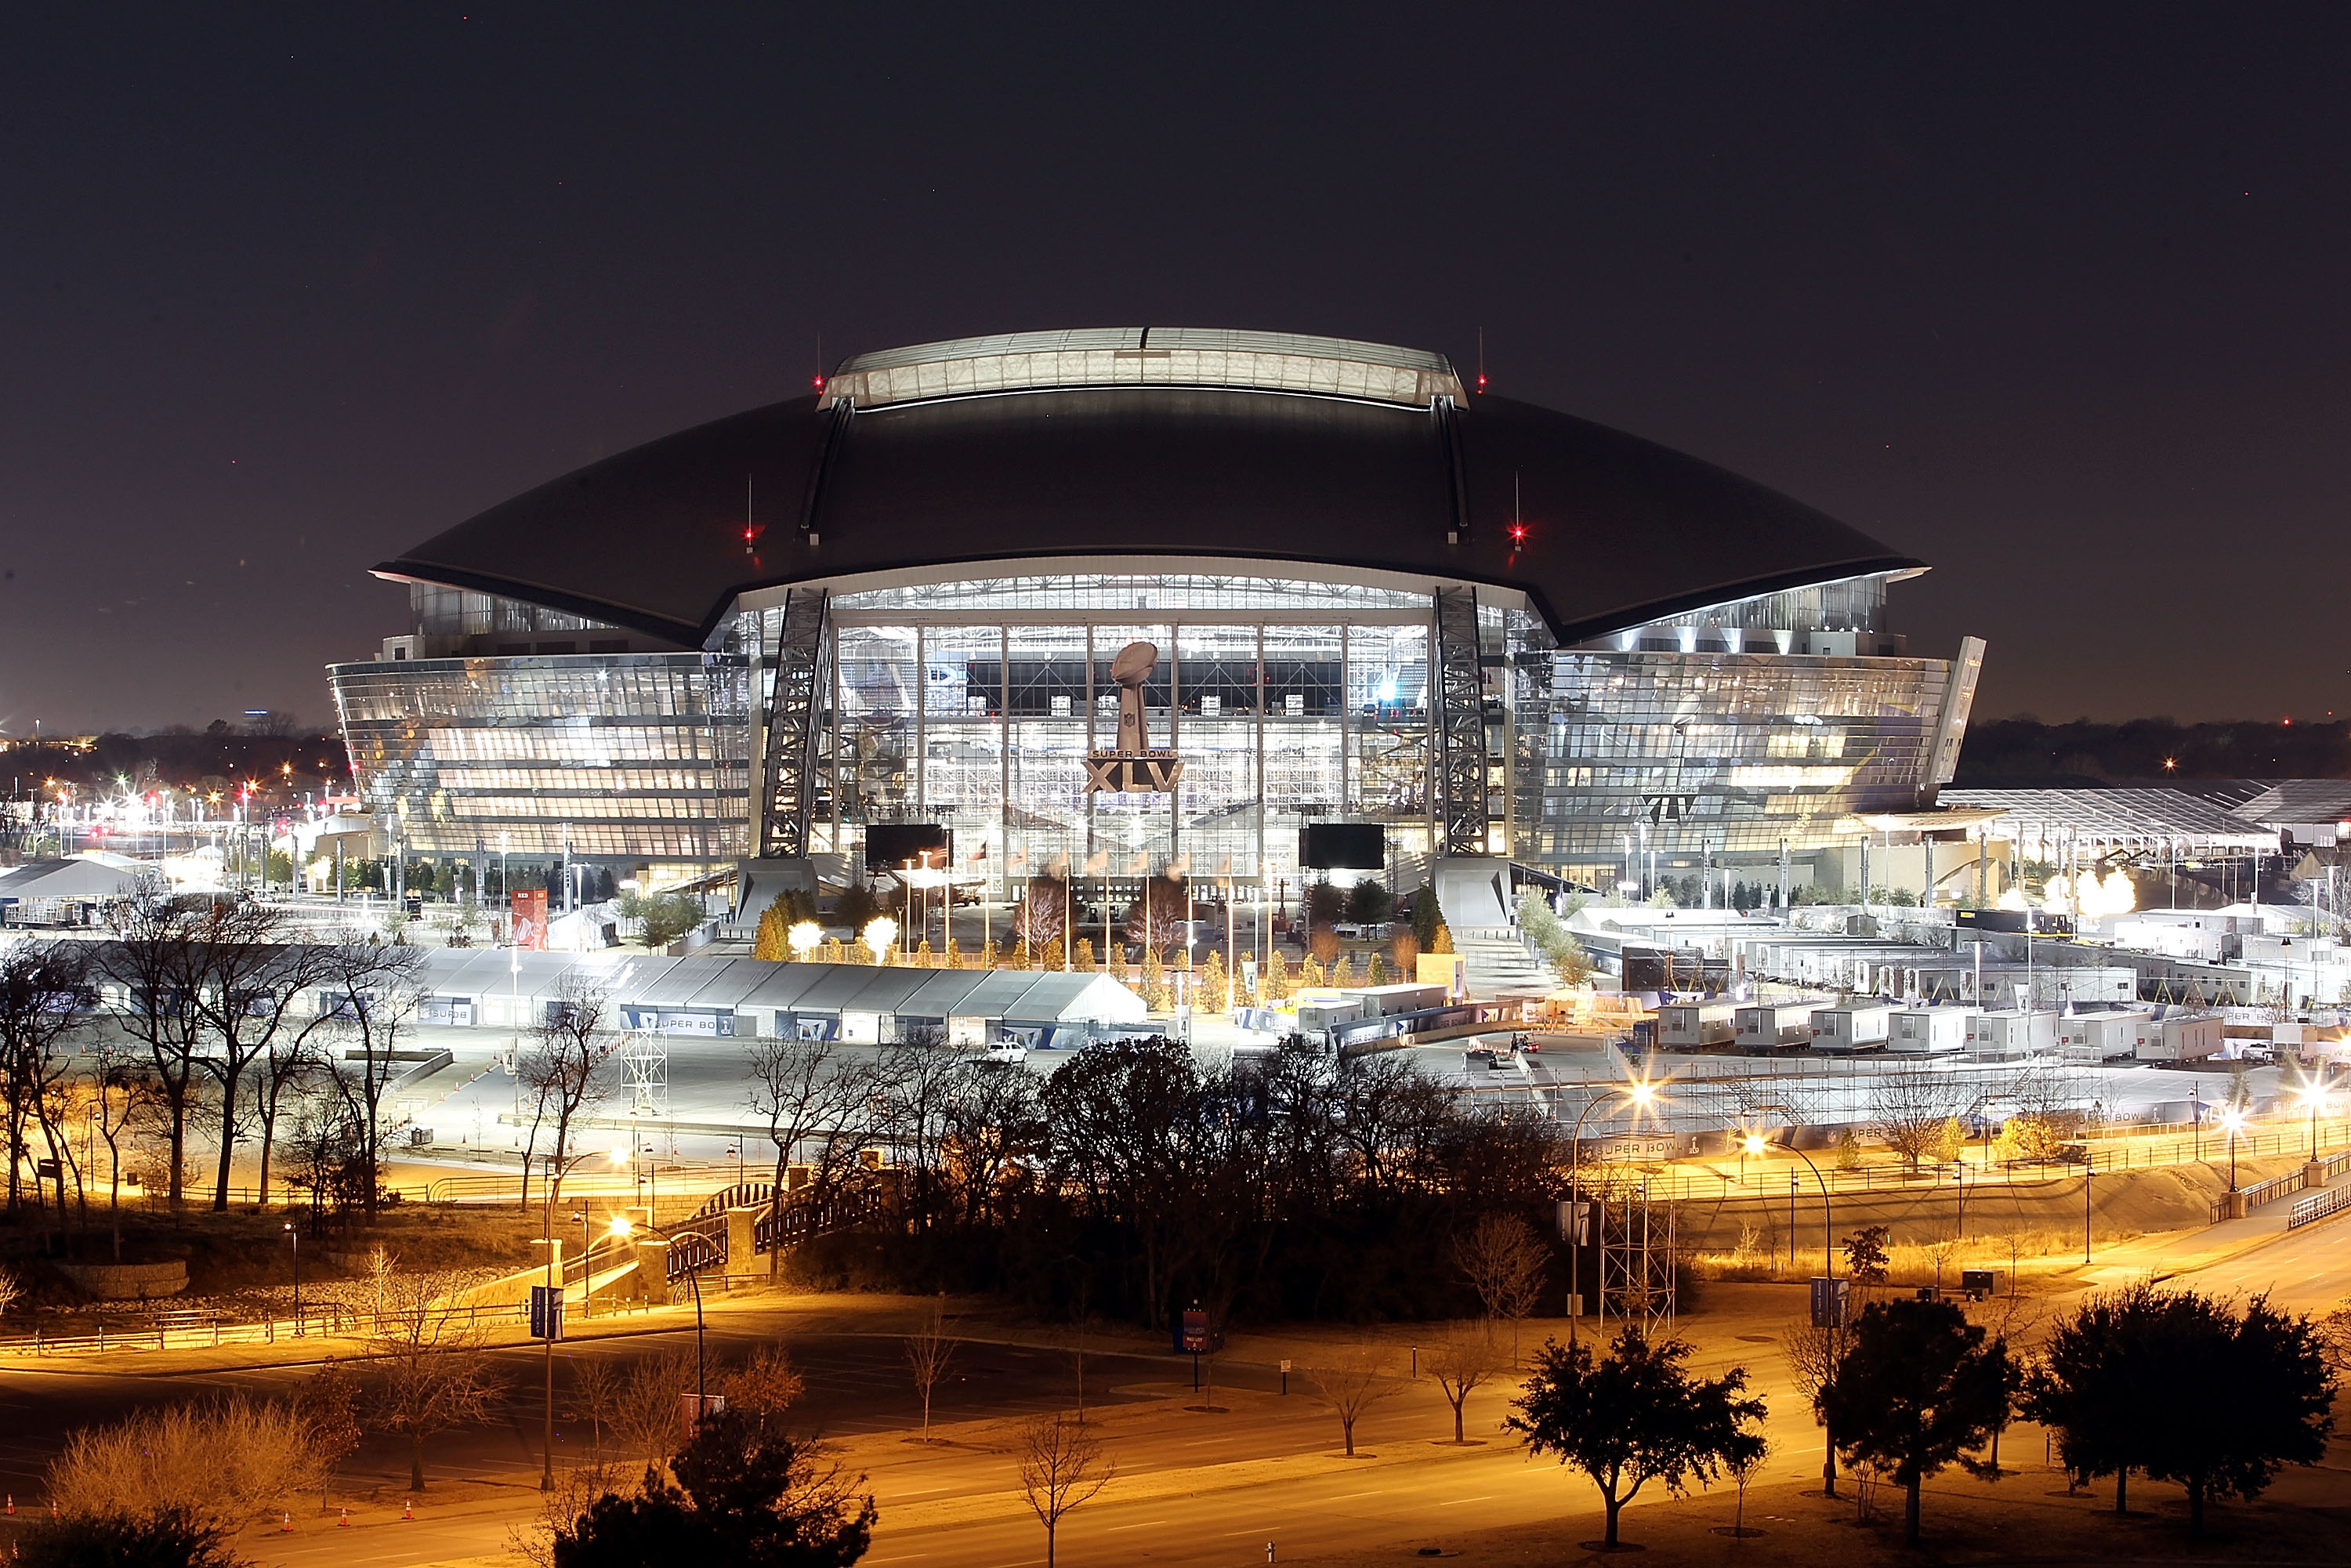 ARLINGTON, TX - JANUARY 26:  A view of Cowboys Stadium at night on January 26, 2011 in Arlington, Texas.  North Texas will host Super Bowl XLV  between the Pittsburgh Steelers and the Green Bay Packers at Cowboys Stadium on February 6, 2011 in Arlington,